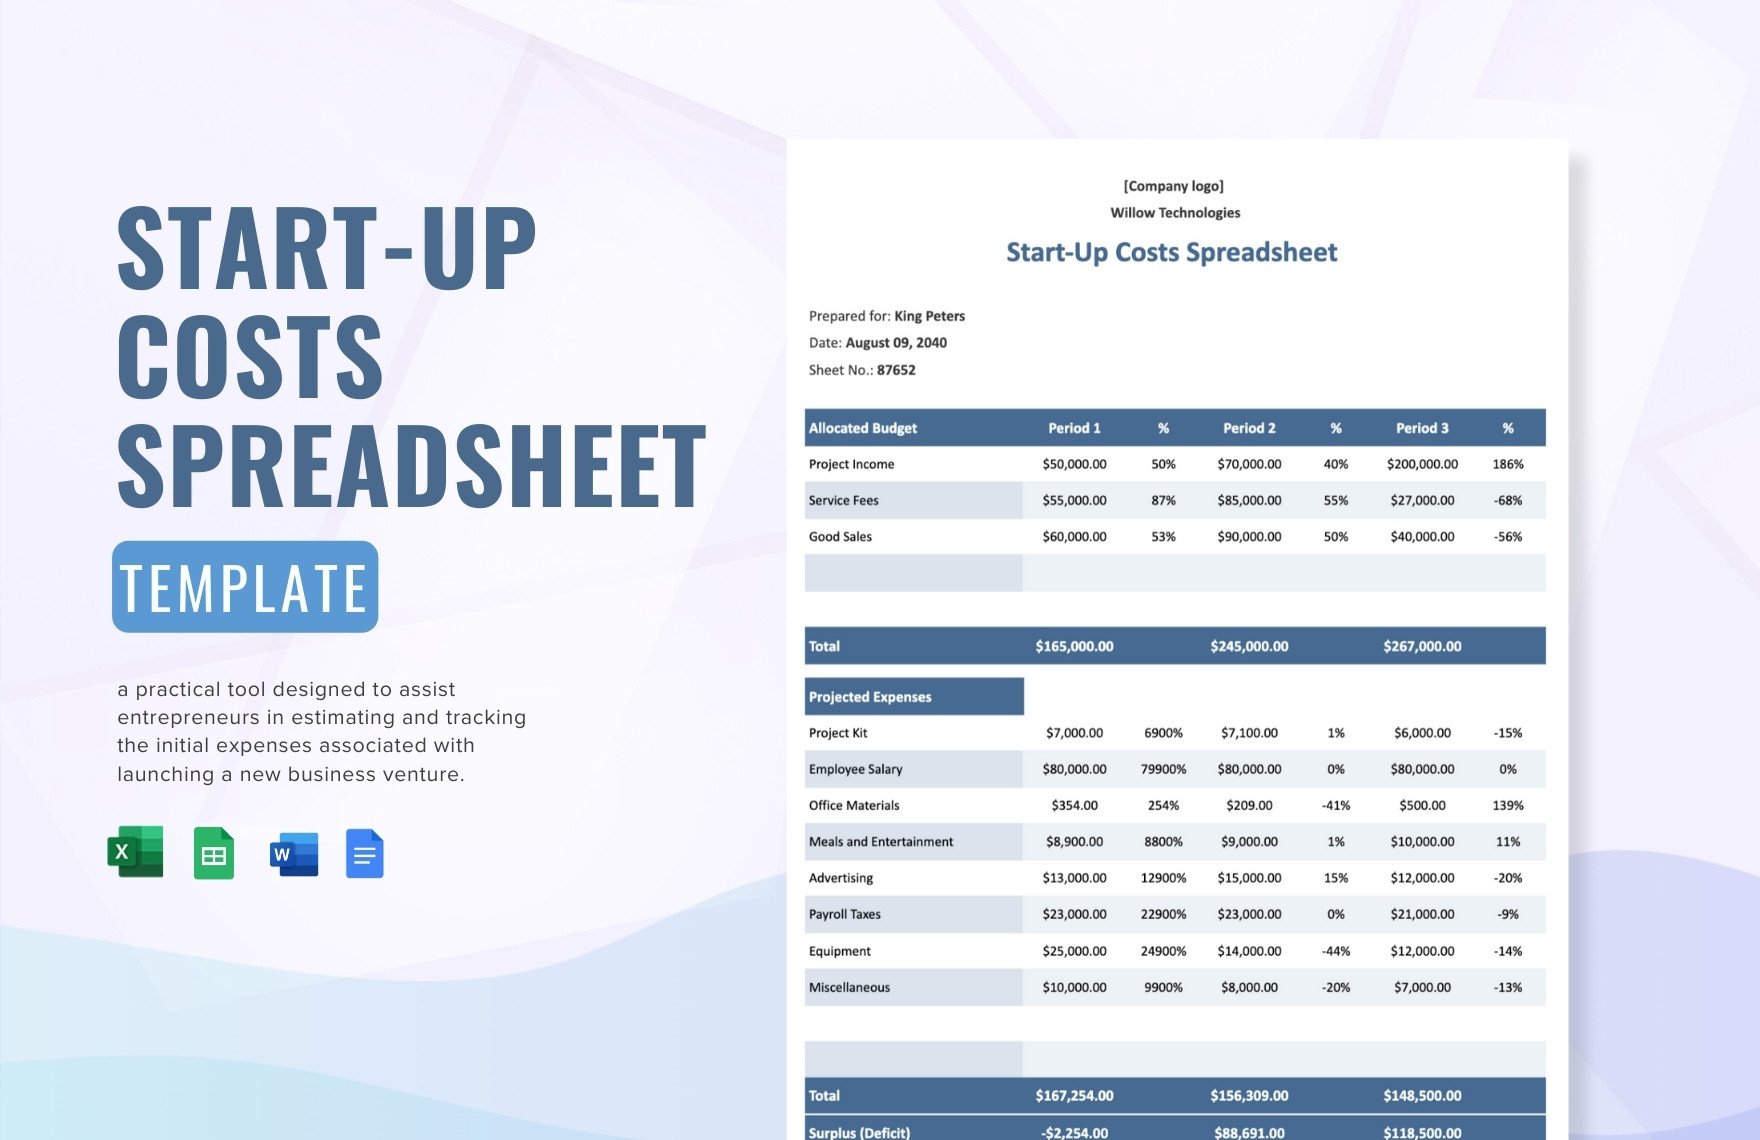 Start-Up Costs Spreadsheet Template in Word, Google Docs, Excel, Google Sheets